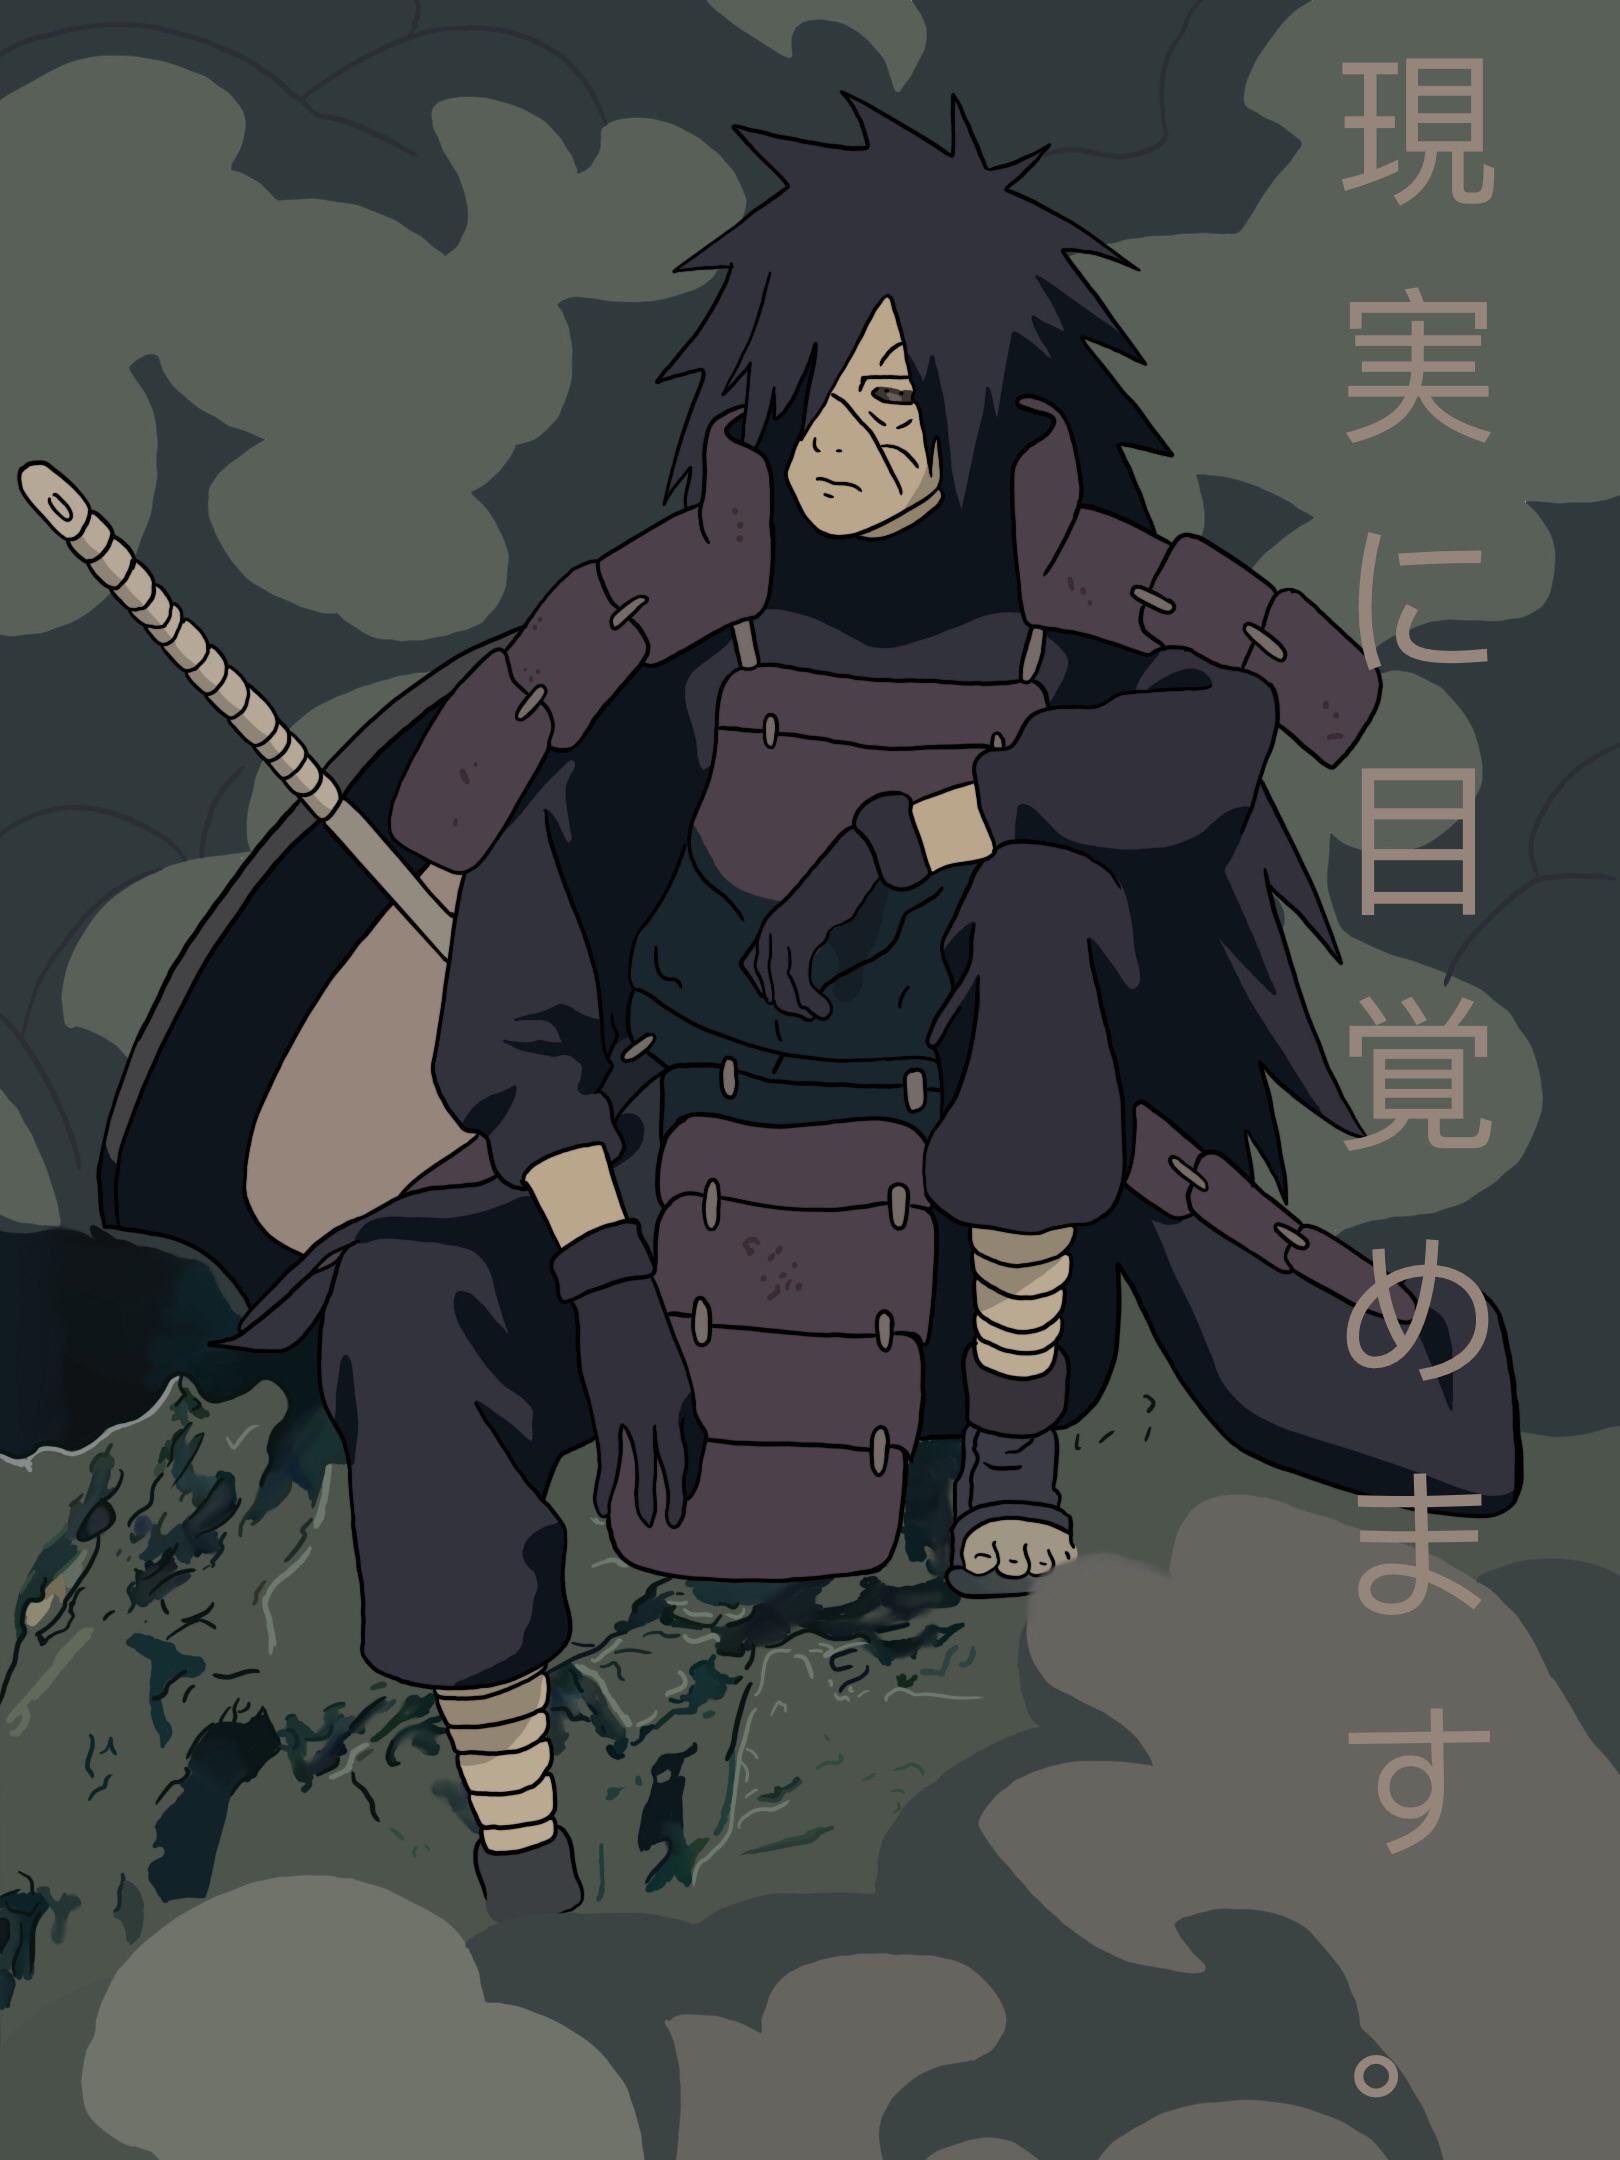 thought id make a madara wallpaper for y'all